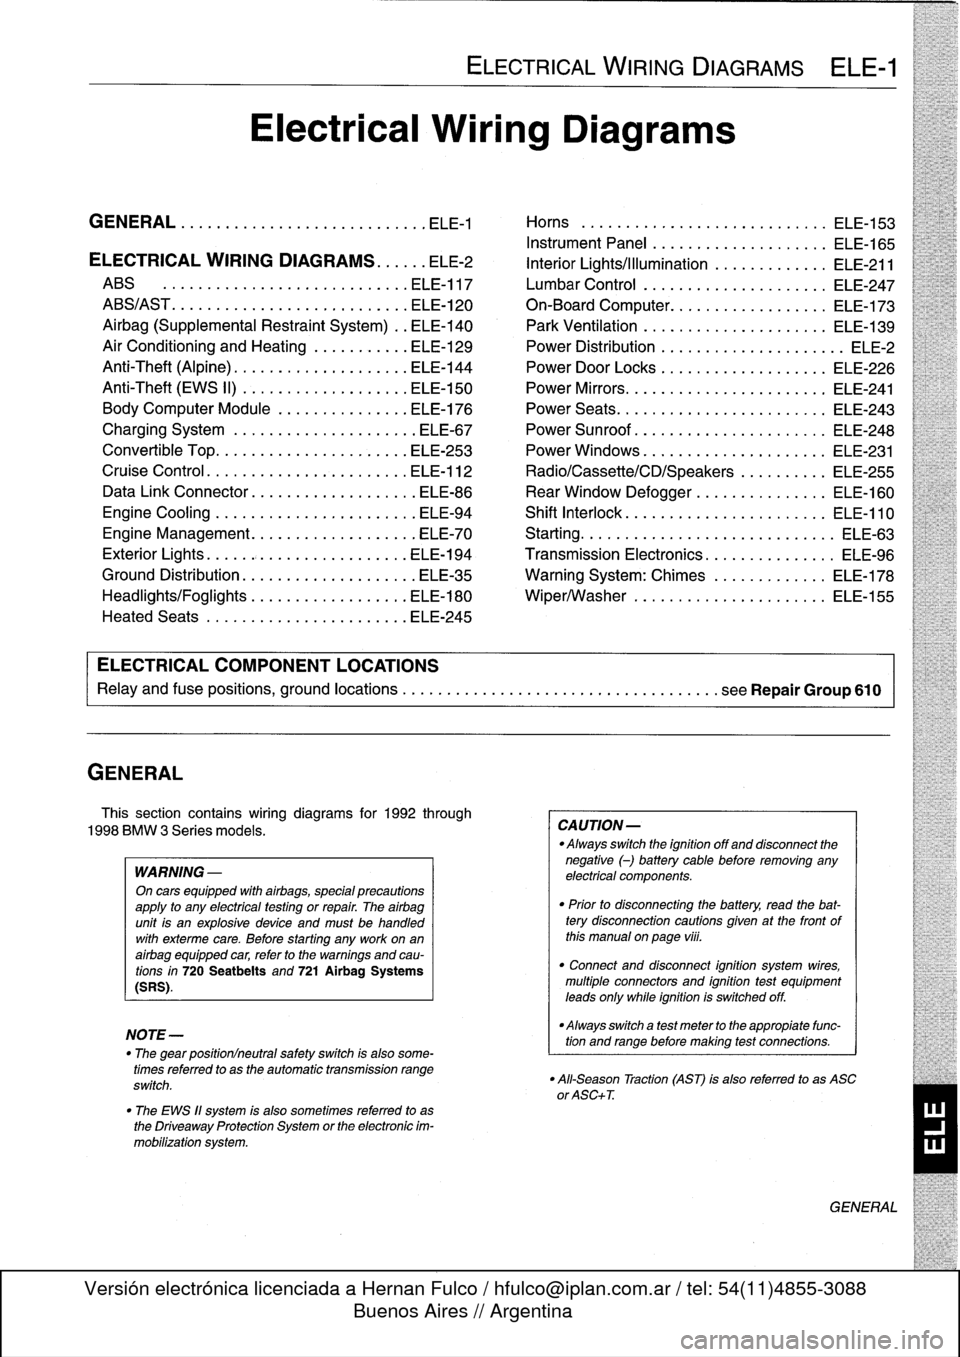 BMW 318i 1997 E36 User Guide 
GENERAL

This
section
contains
wiring
diagrams
for
1992
through

1998
BMW
3
Series
models
.

WARNING
-

On
cars
equipped
with
airbags,
special
precautions
apply
to
any
electrical
testing
or
repair
.
